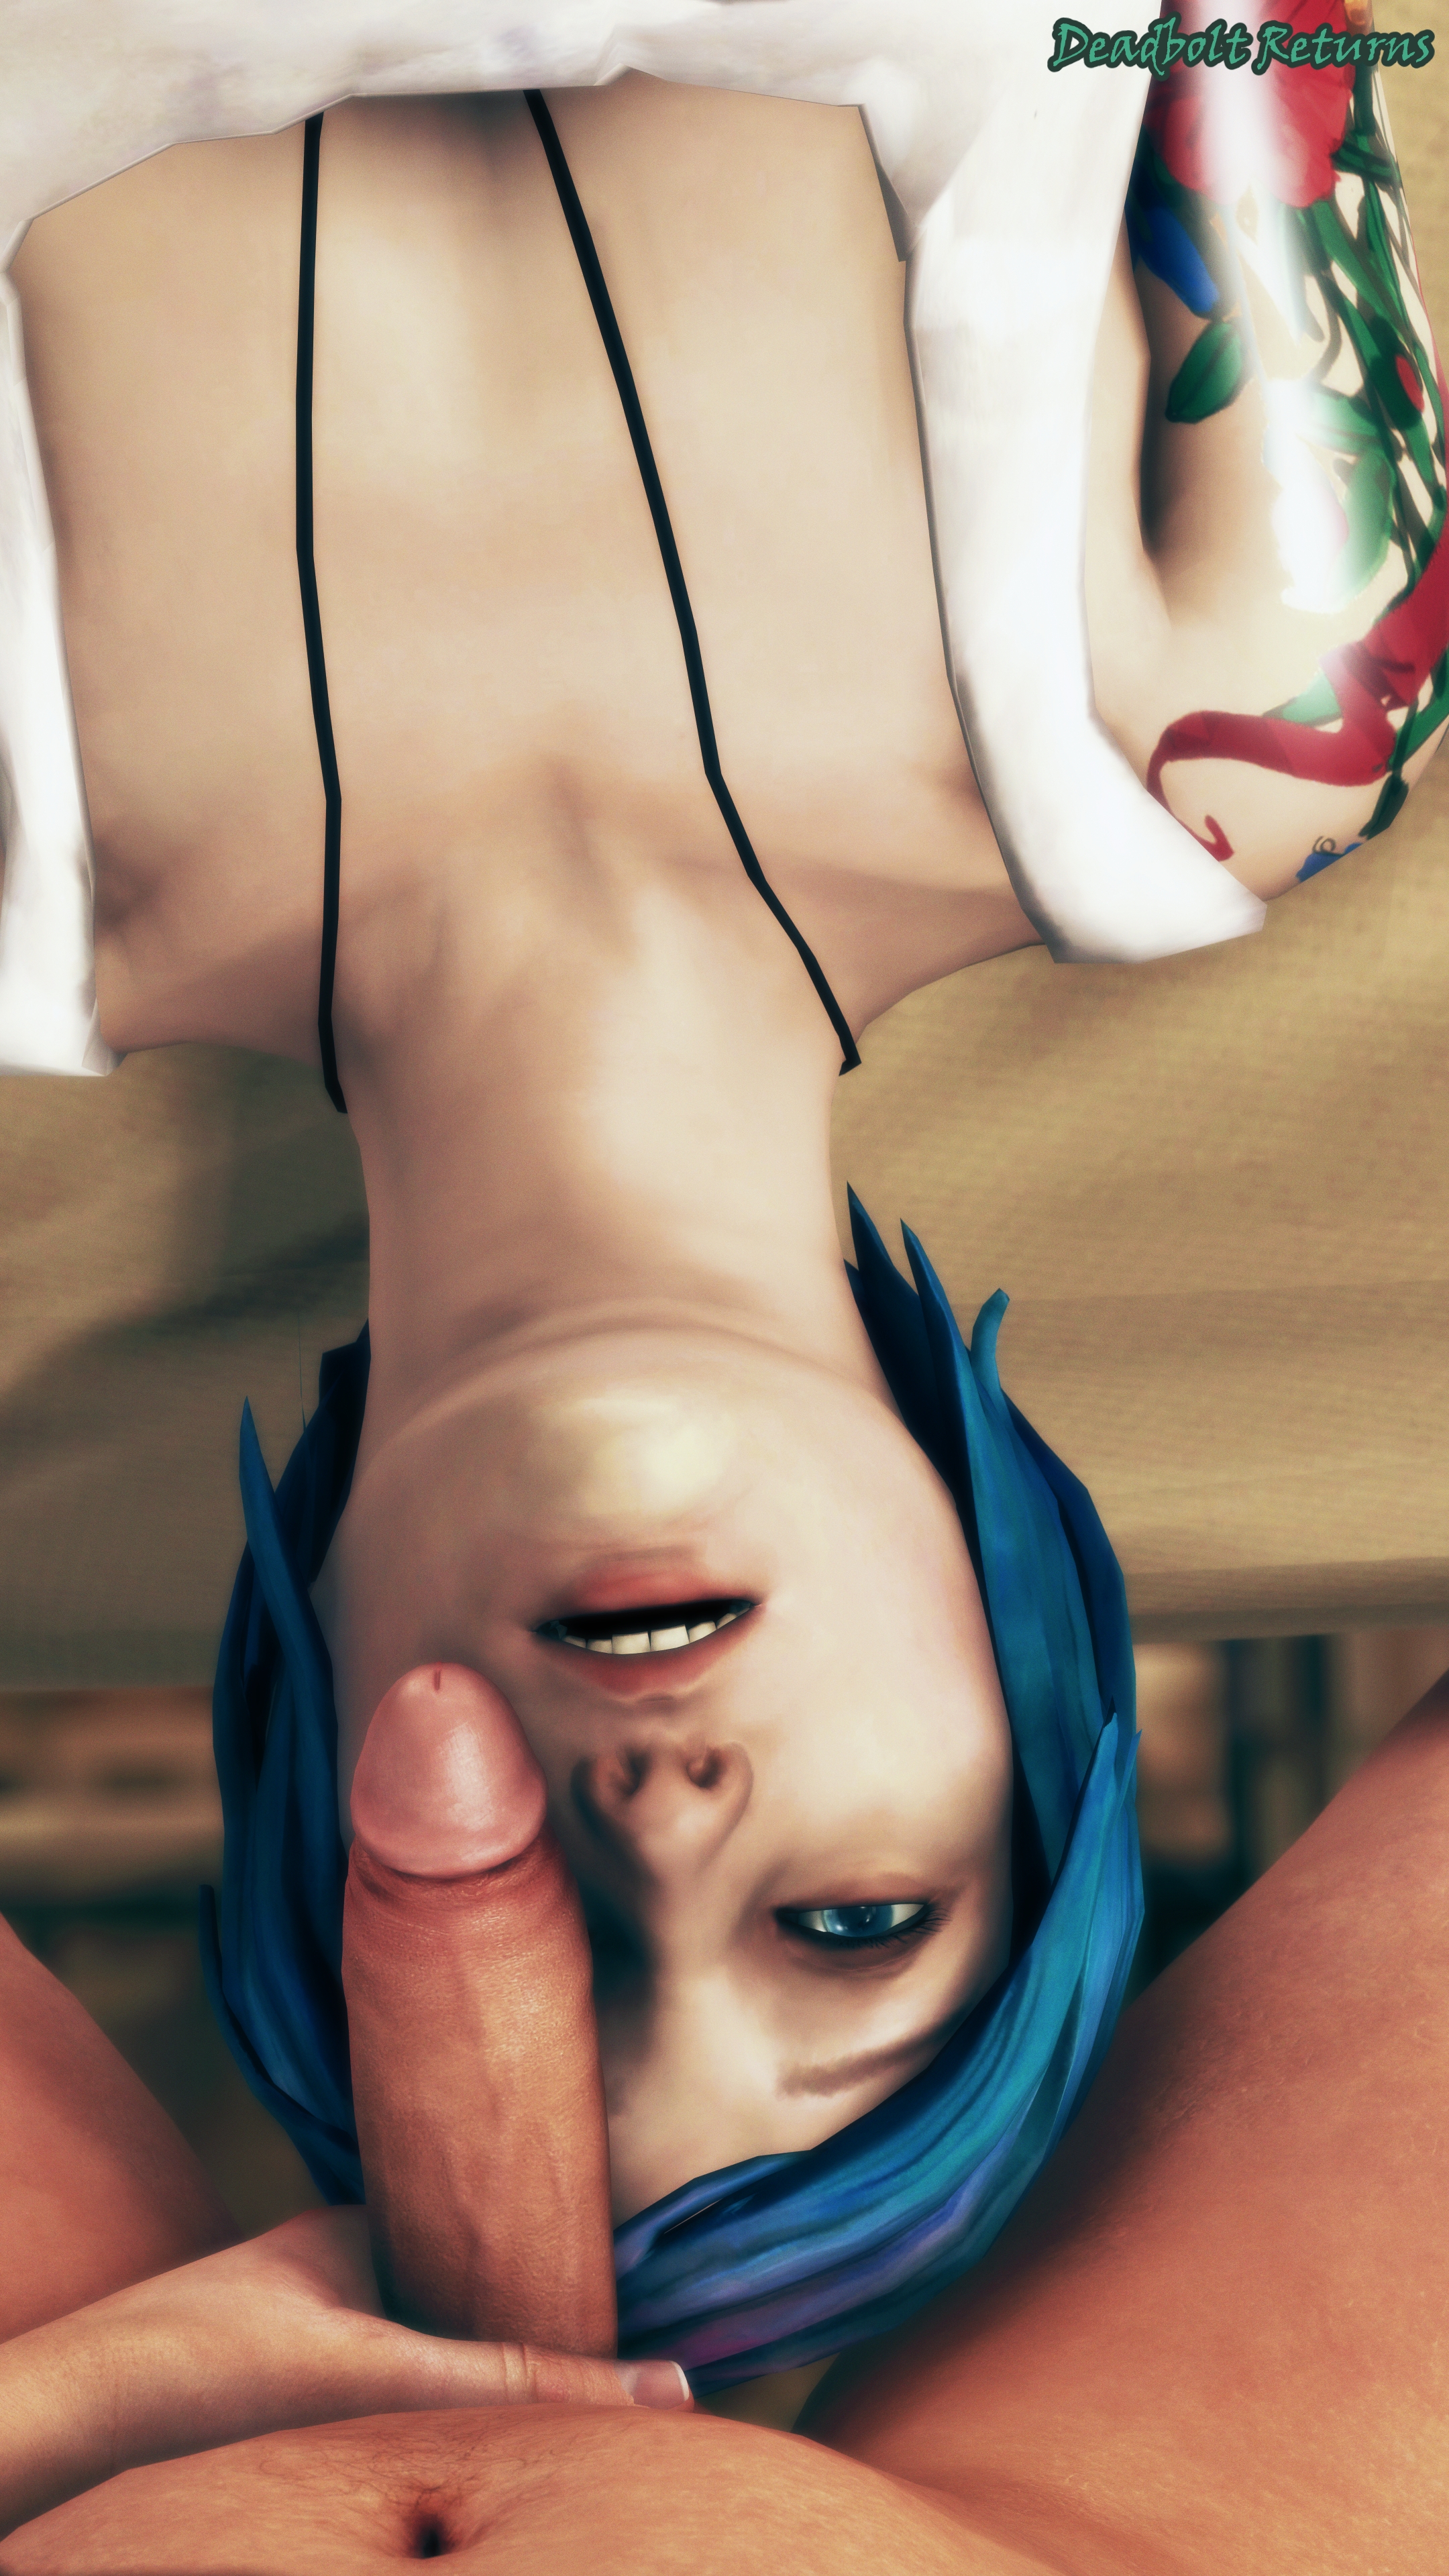 Chloe Price Returns to the Casting Couch Chloe Price Chloe Life Is Strange Sfm Source Filmmaker Rule34 Rule 34 3d Porn 3d Girl 3dnsfw Nsfw Casting Couch 7